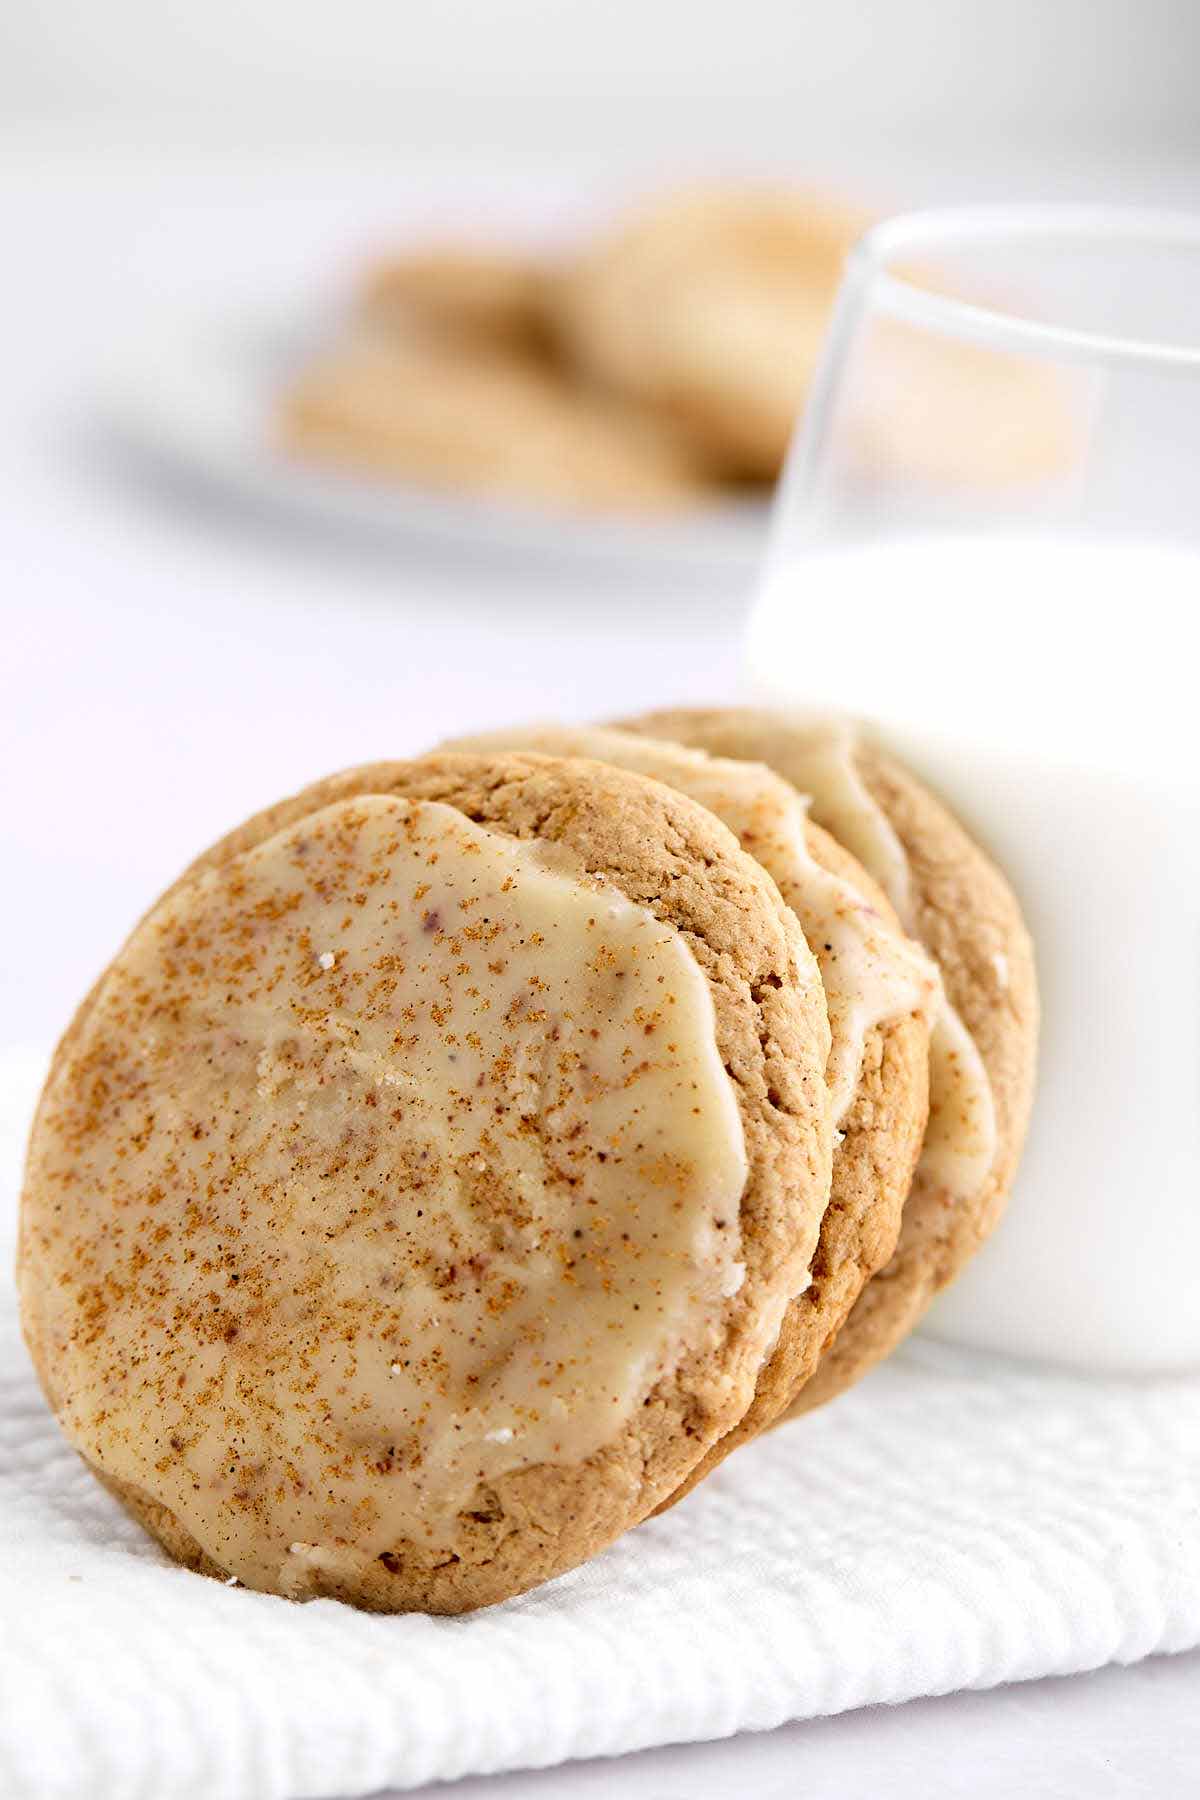 Spice cake mix cookies leaning against a glass of milk.